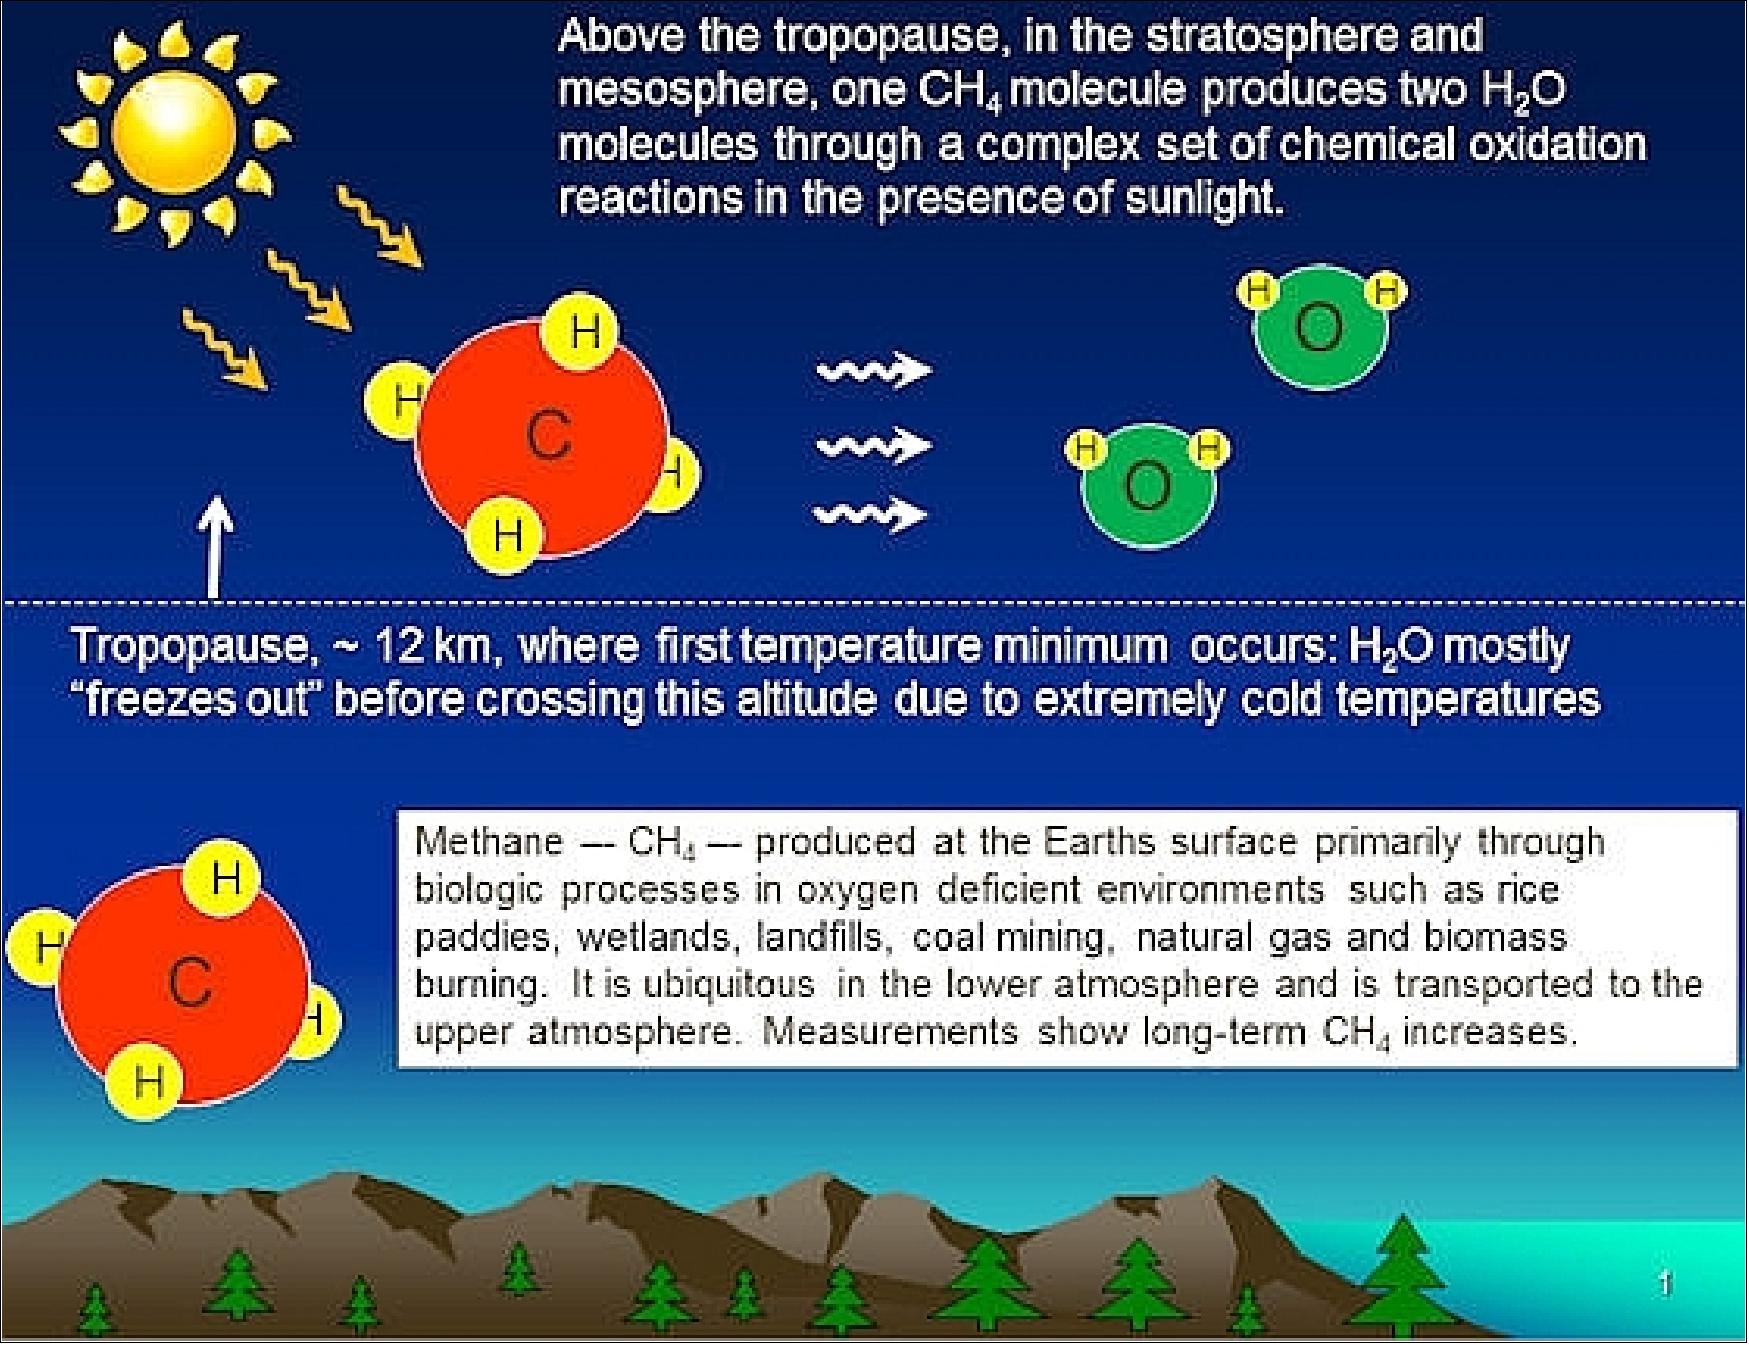 Figure 19: The graphic shows how methane, a greenhouse gas, boosts the abundance of water at the top of Earth's atmosphere. This water freezes around "meteor smoke" to form icy noctilucent clouds (image credit: Hampton University, NASA)